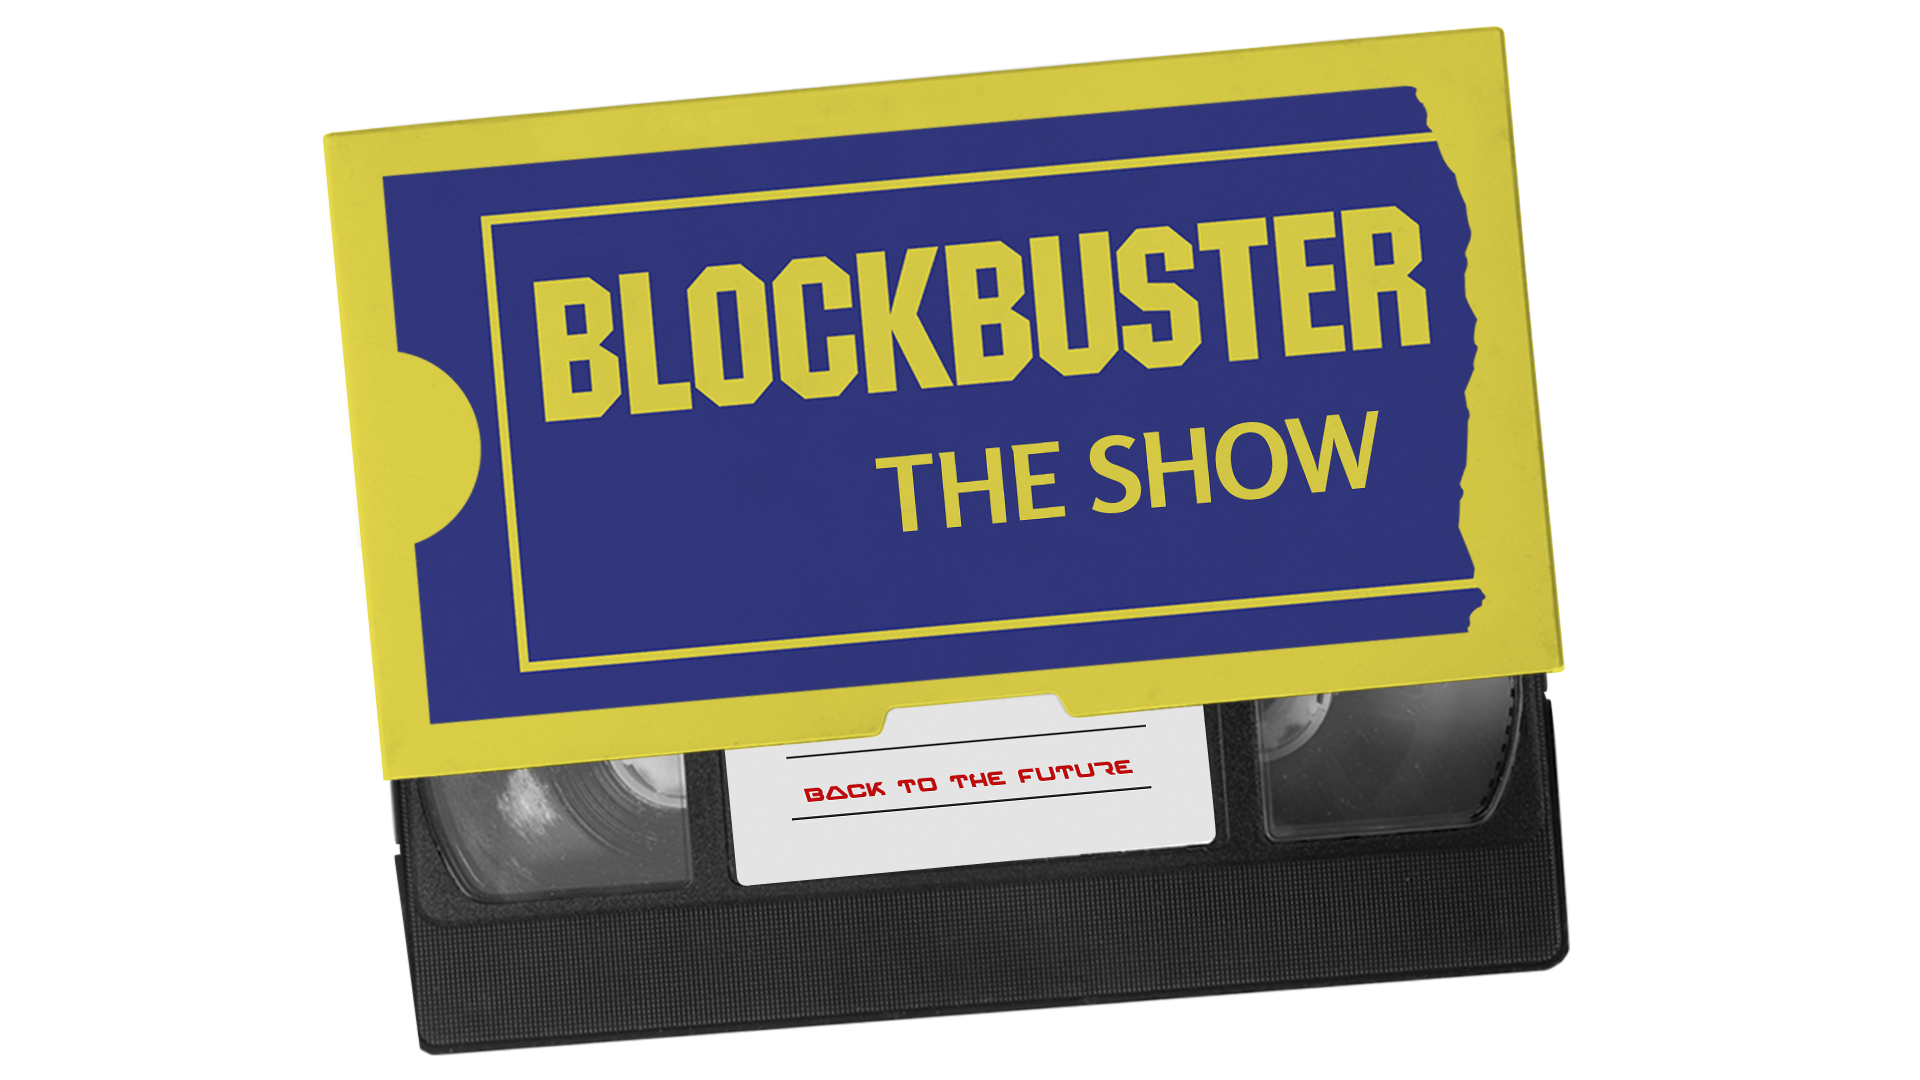 BlockBuster. The Show